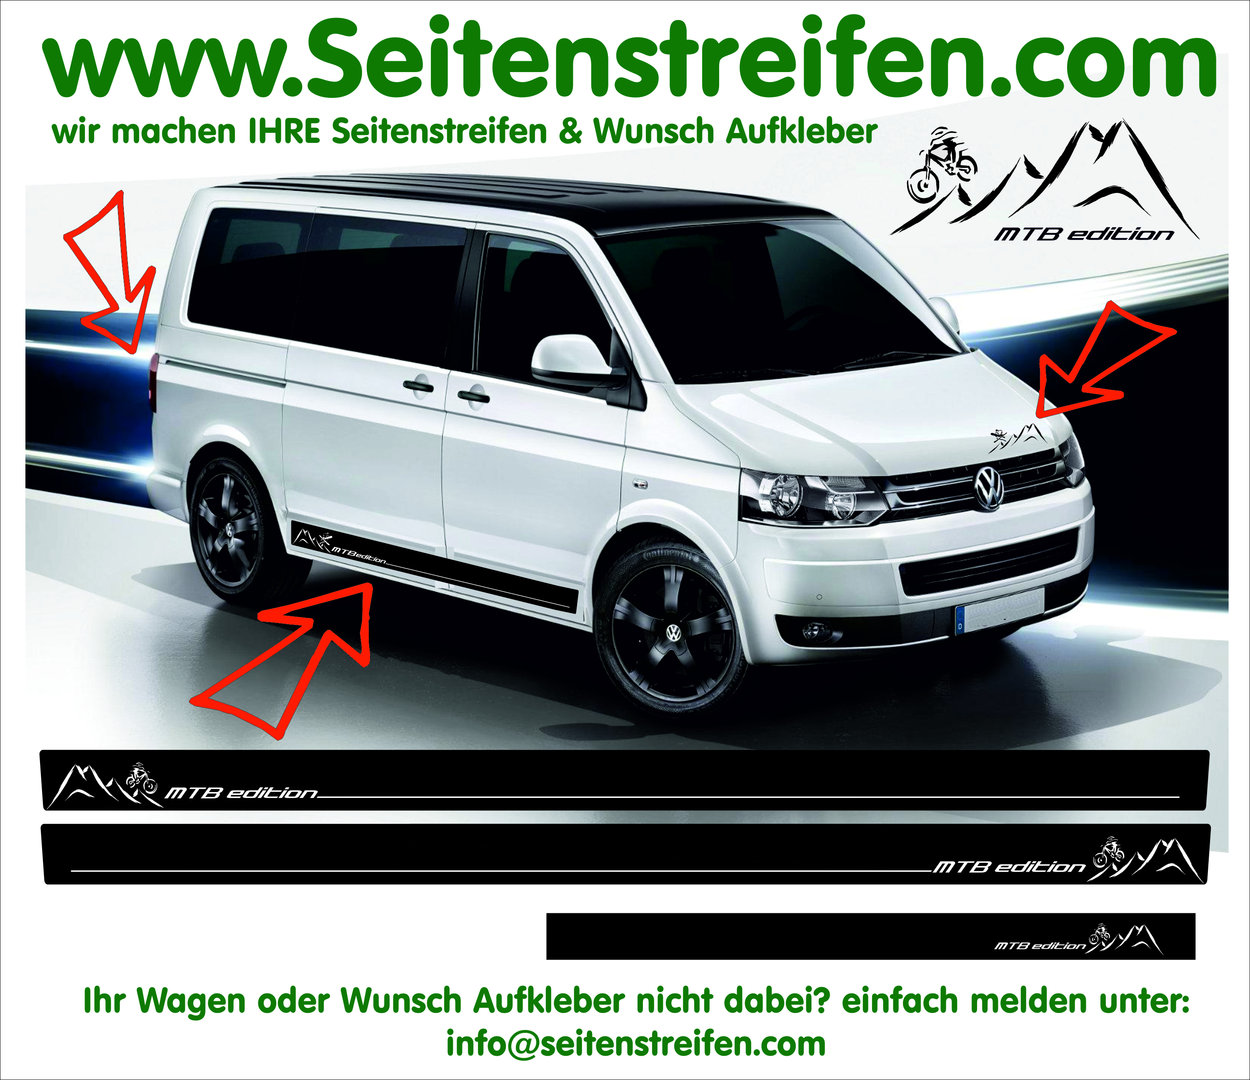 VW Bus T4 T5 T6 - Mountain Bike Downhill Freeride MTB Edition Graphics Decals Sticker Kit - N° 5772